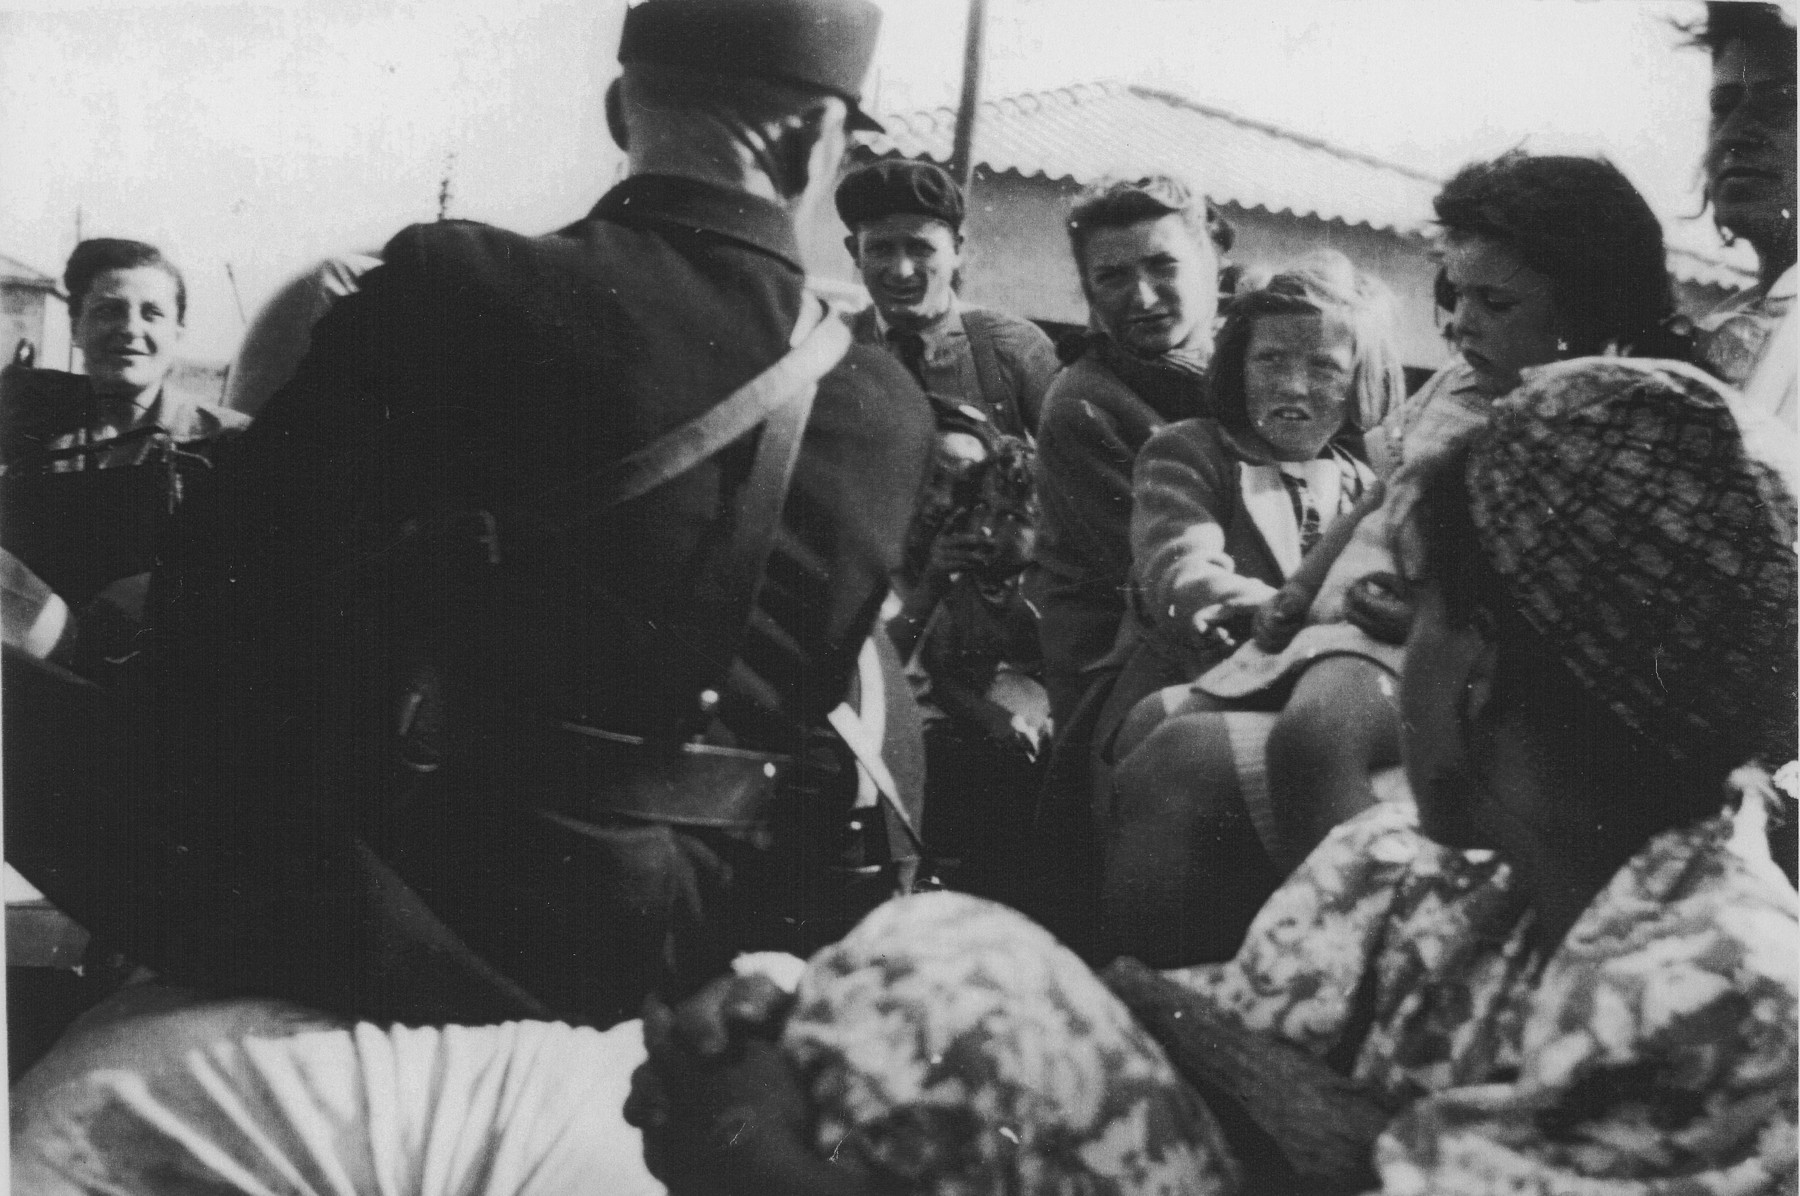 A French policeman directs a group of women and children in the Rivesaltes transit camp during their departure from the camp.